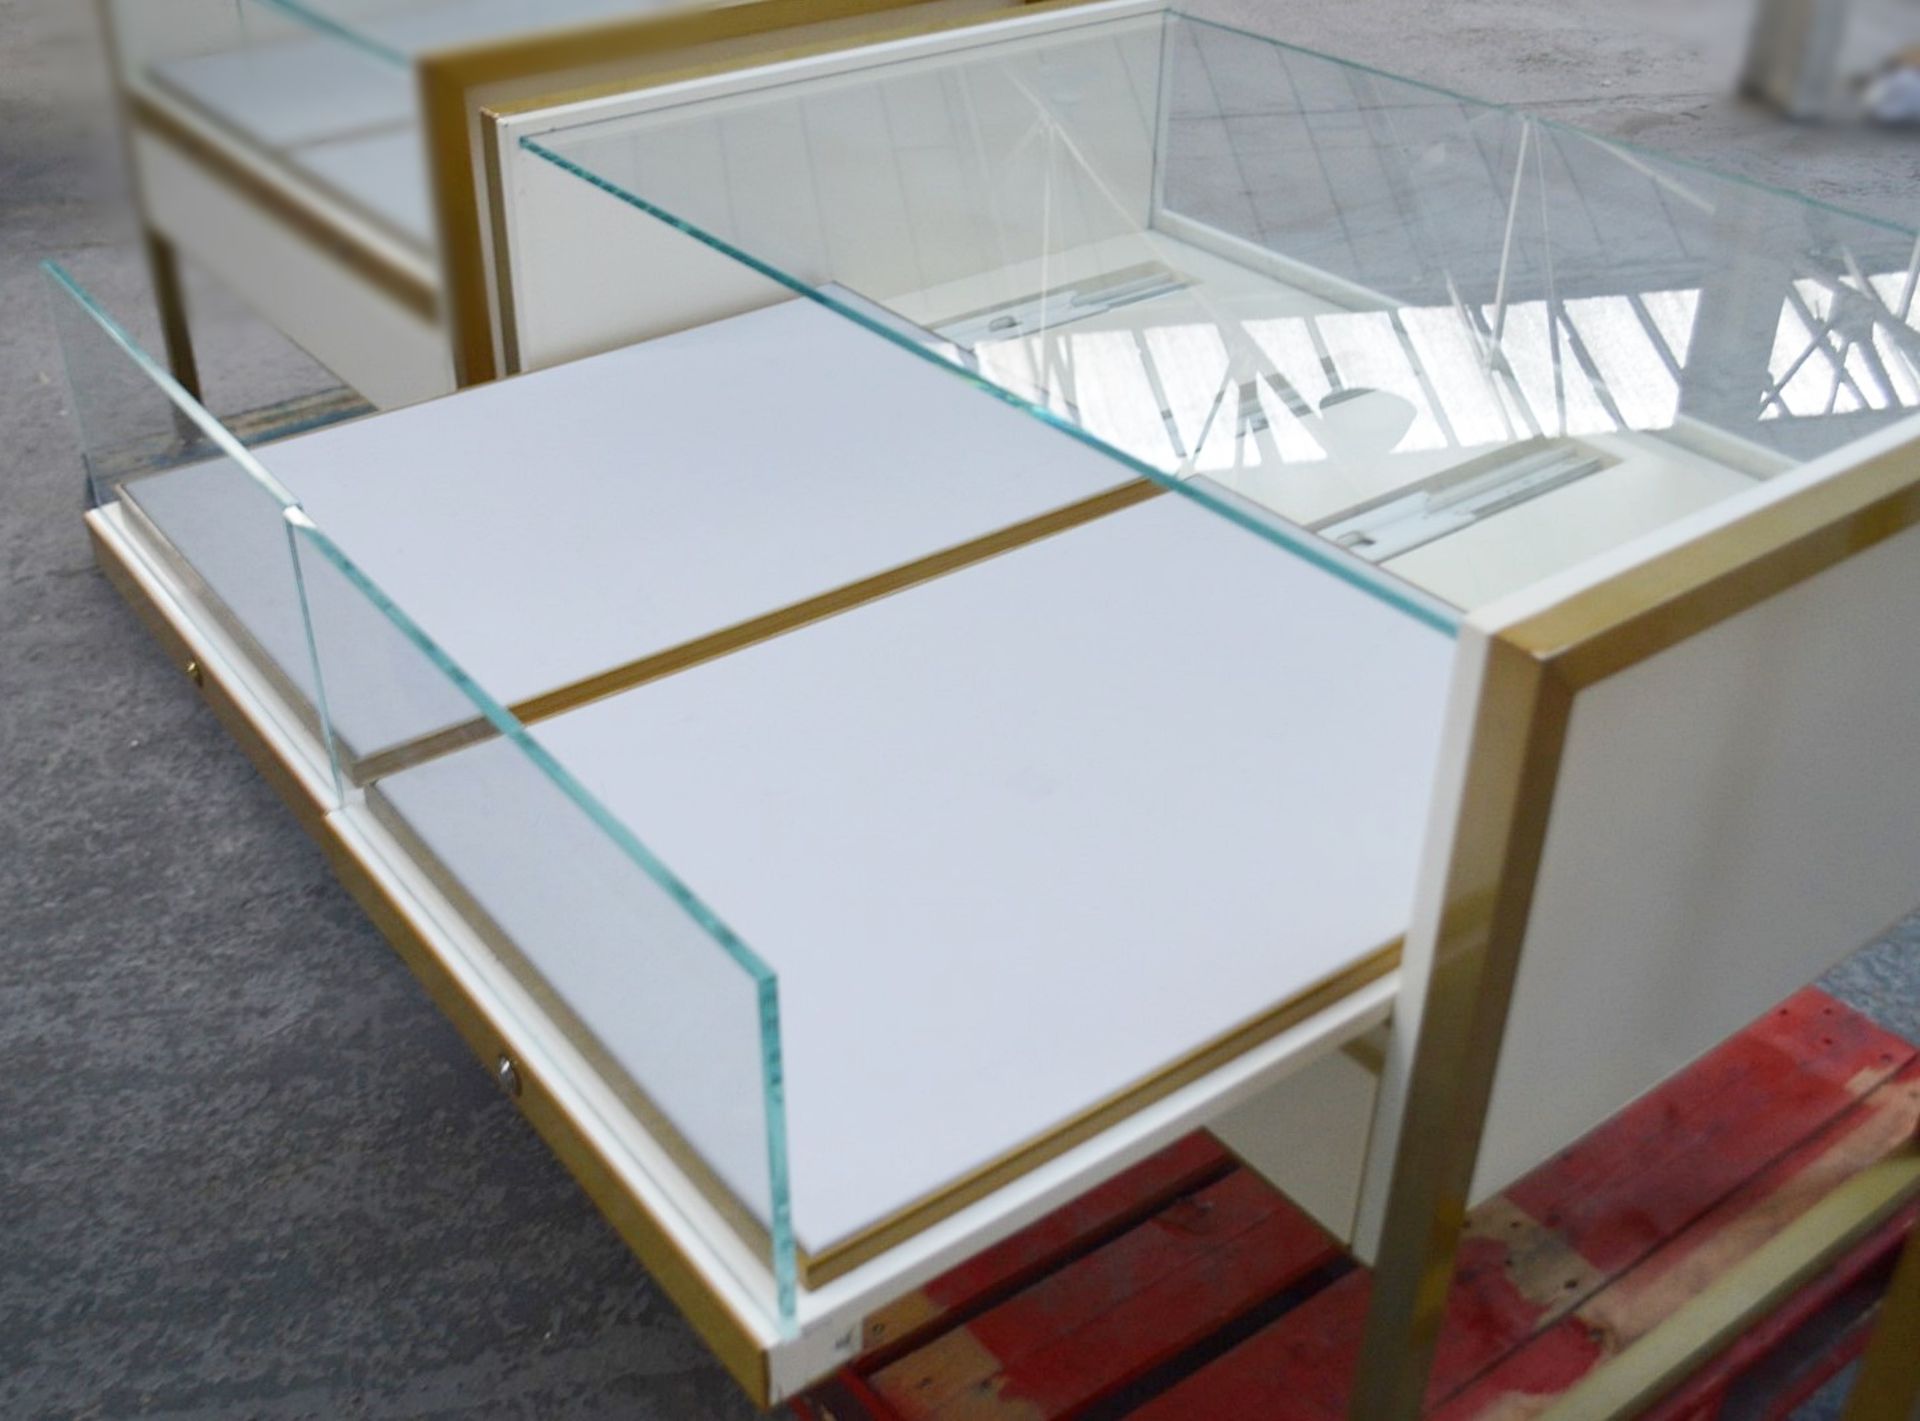 1 x Freestanding Jewellery Display Cabinet Featuring 2 x Pull-Out Trays With Leather Inserts - Image 4 of 7